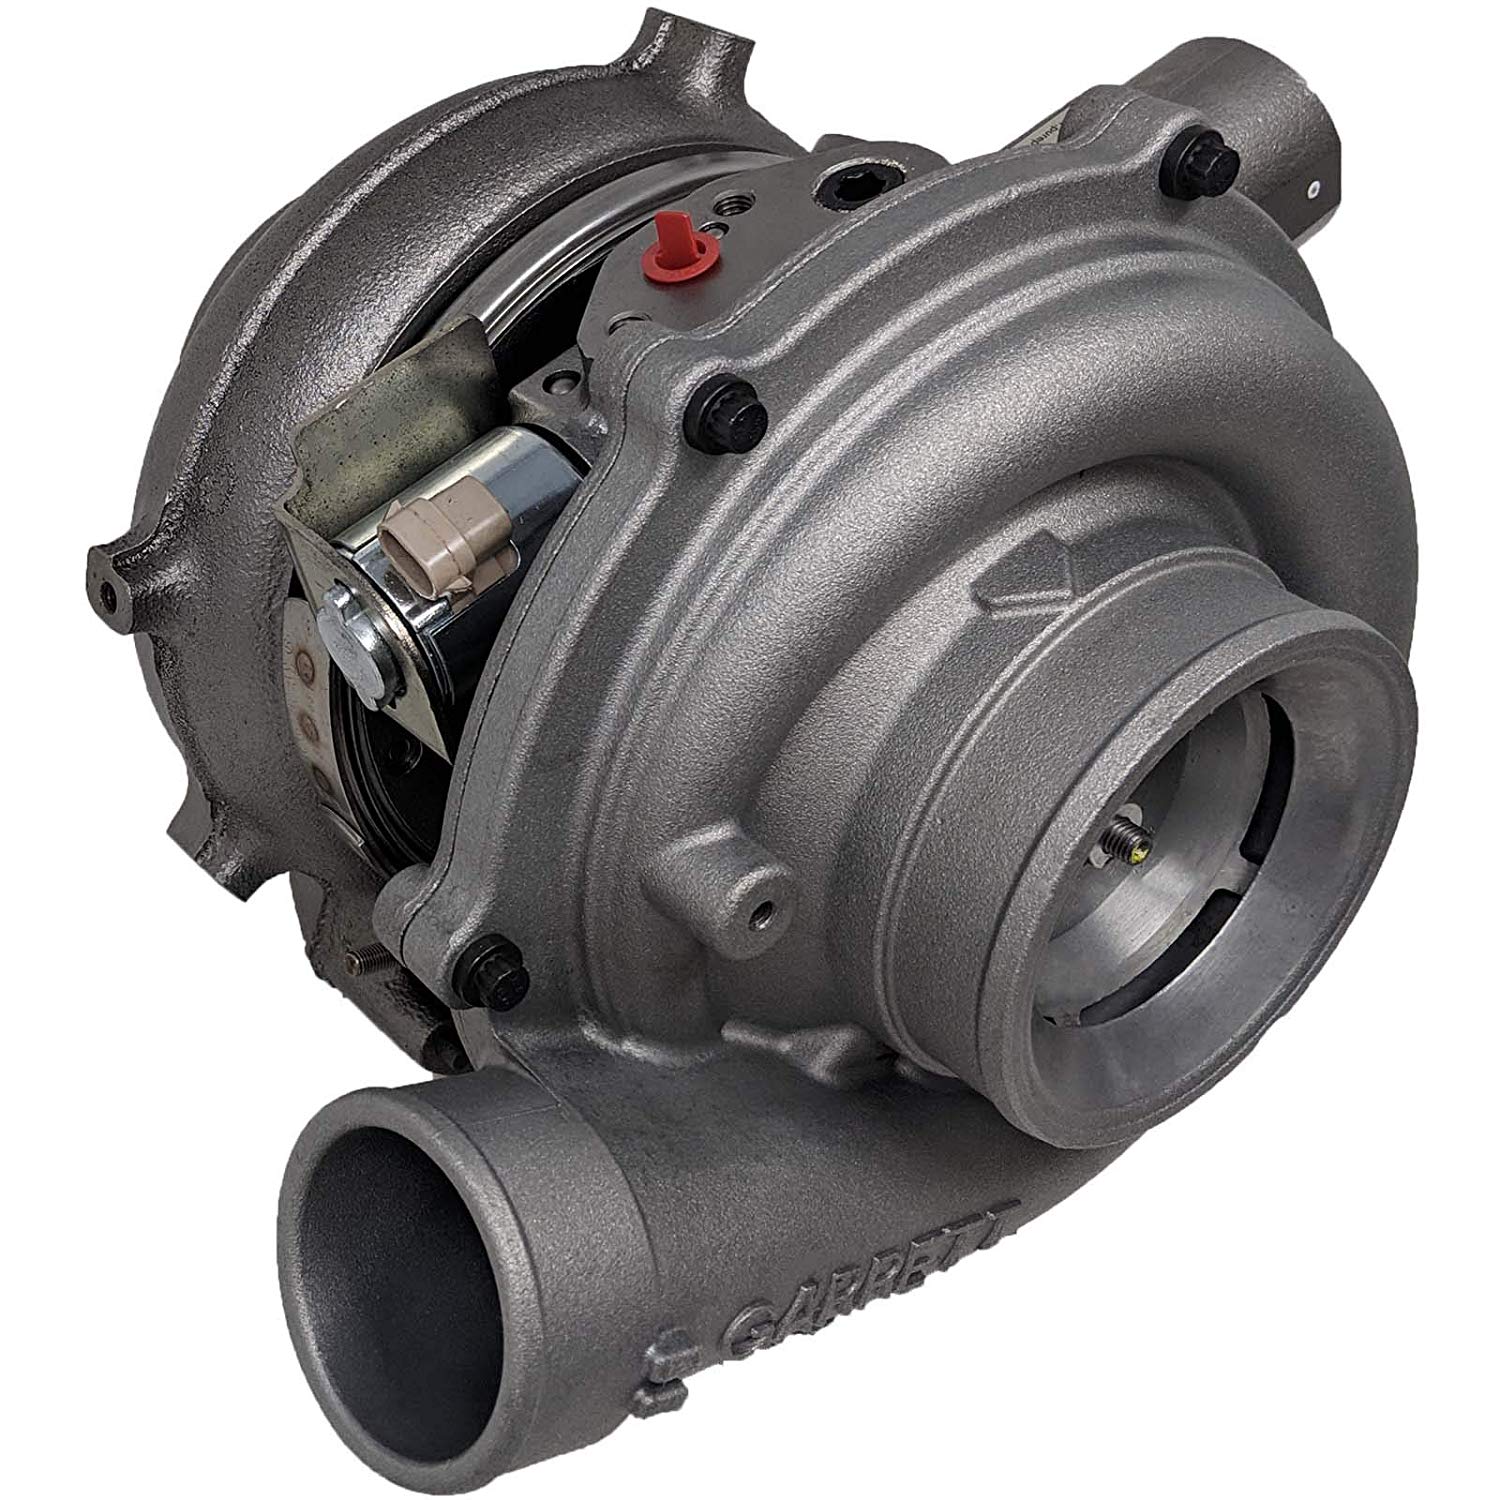 Pure Power Remanufactured Ford 6.0L Powerstroke Turbocharger F250 F350 - FULLY TESTED Turbo - DK Engine Parts (2003-2004.5)